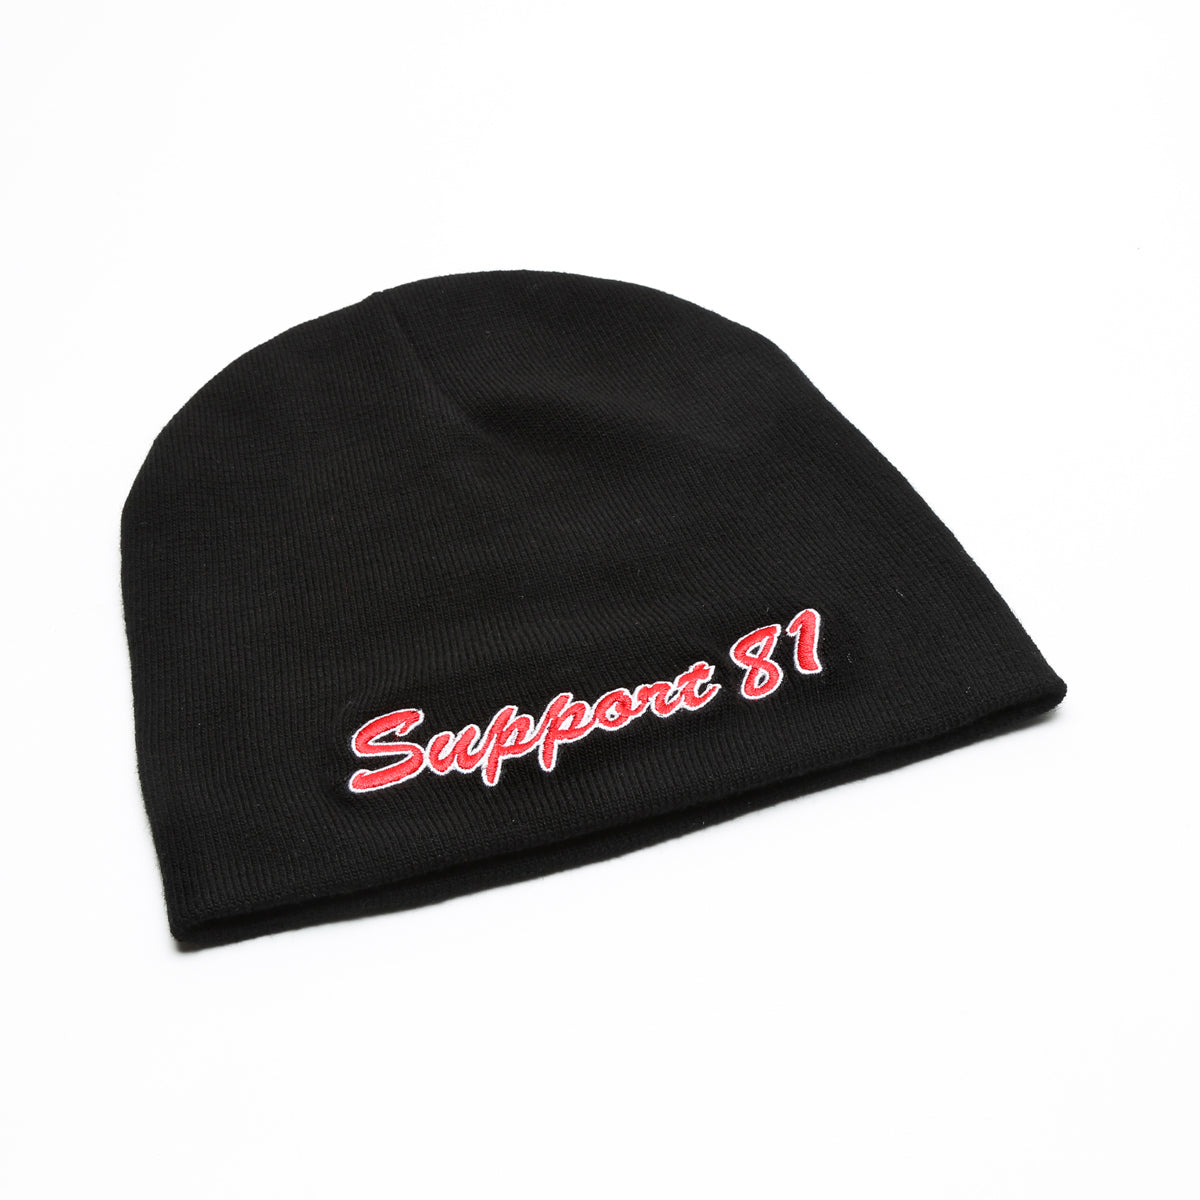 Beanie - Black - Without Cuff - Support 81 Frisco